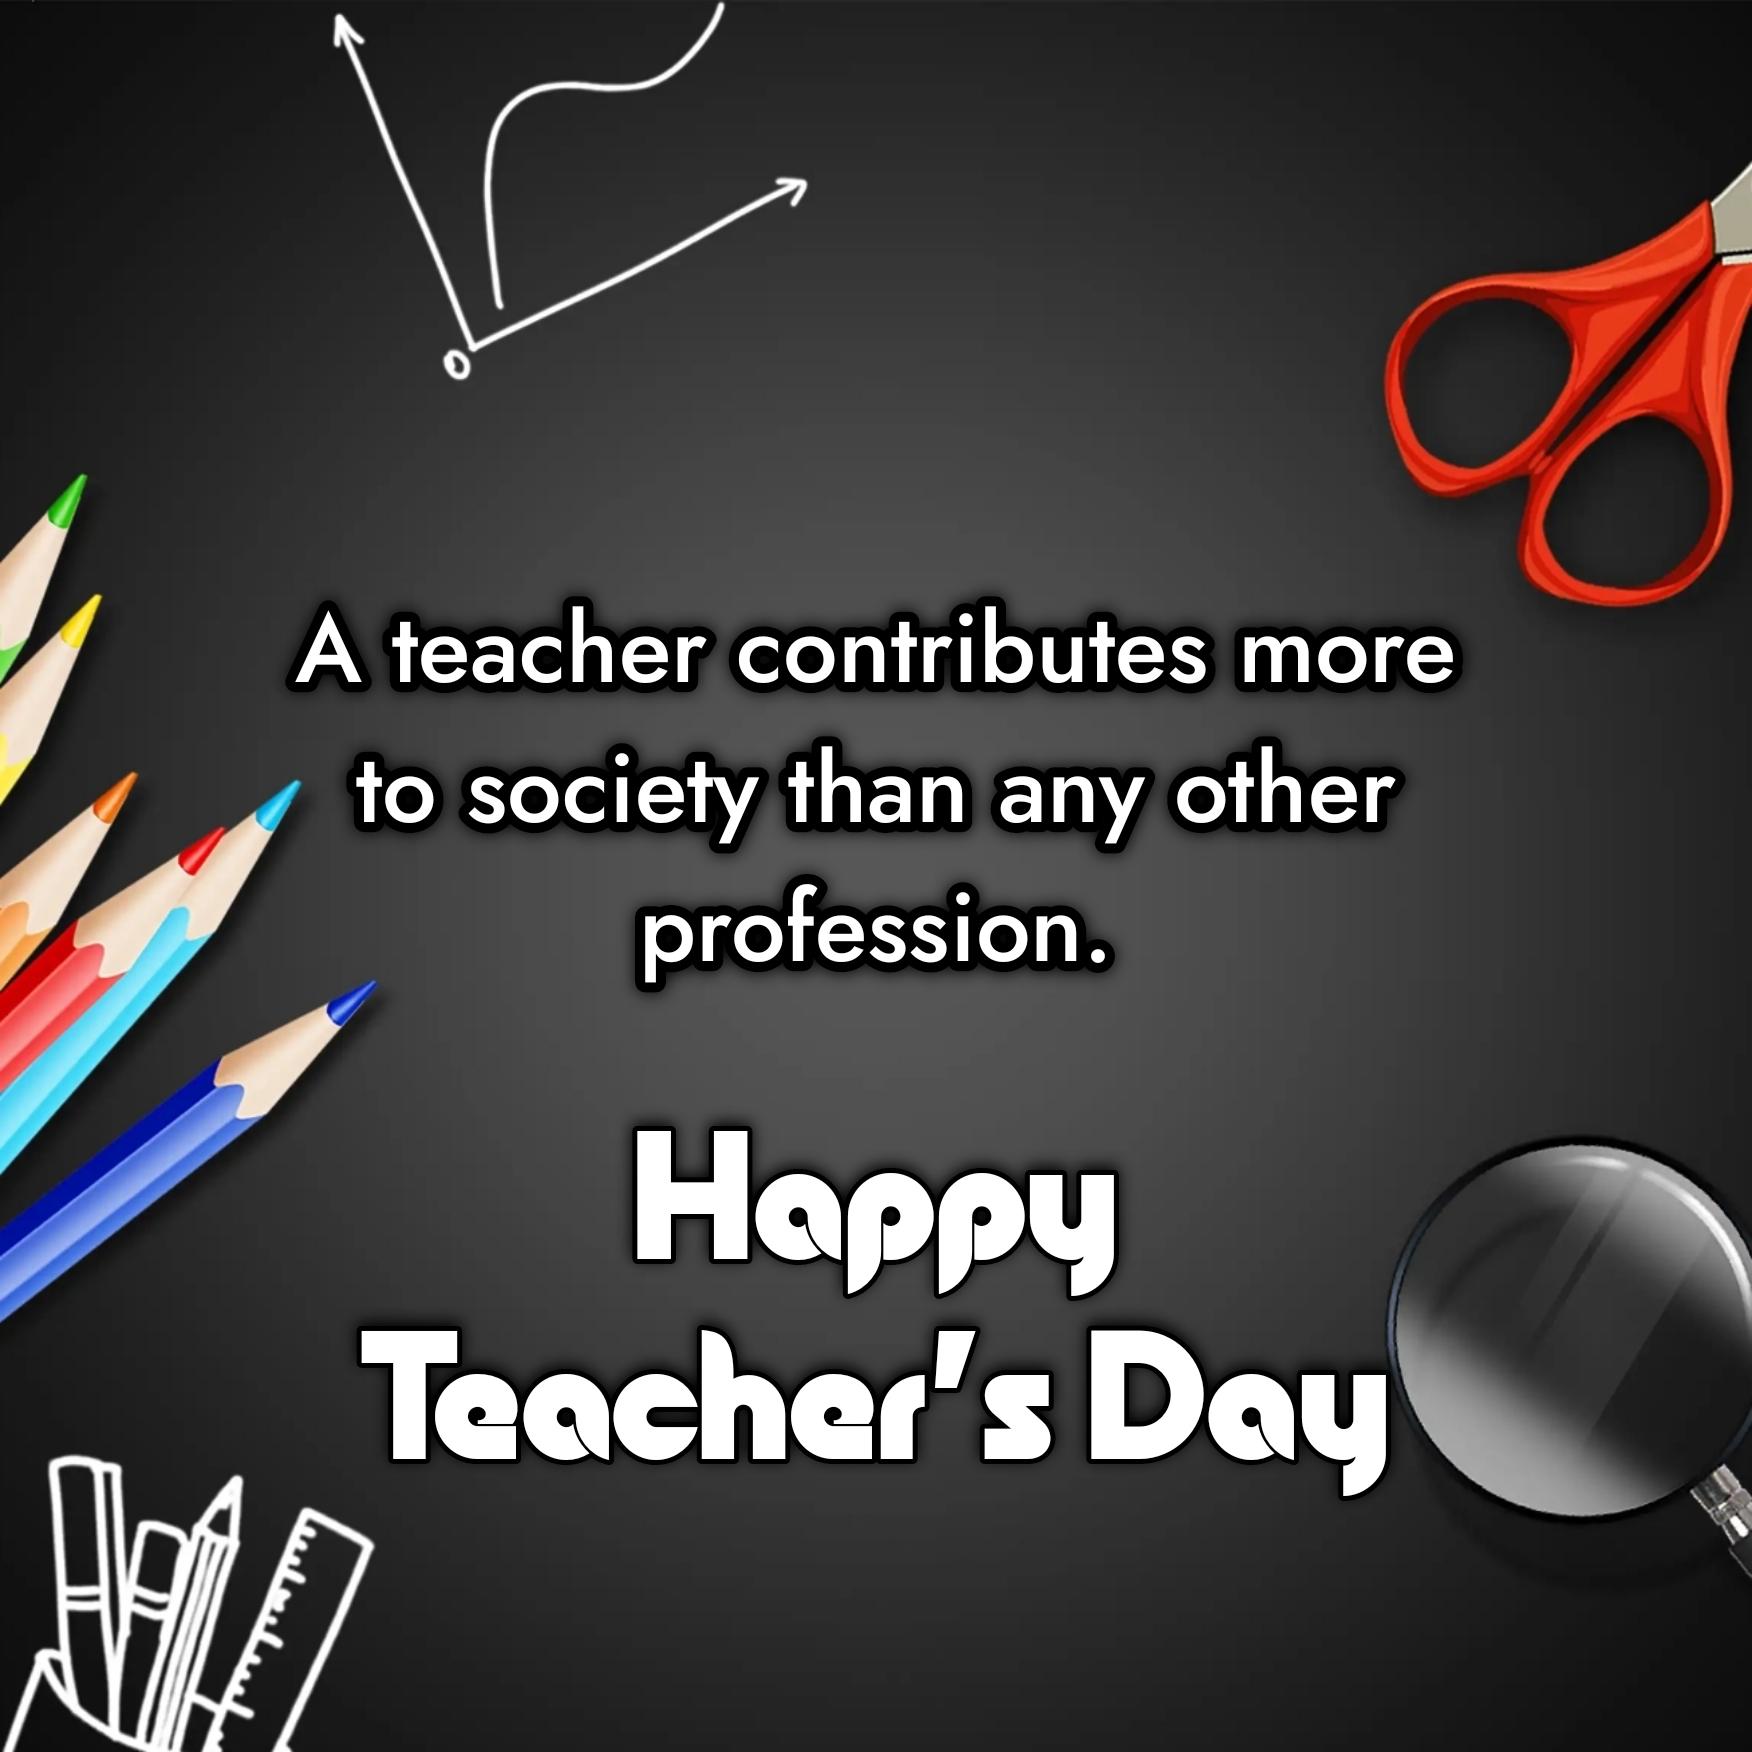 A teacher contributes more to society than any other profession